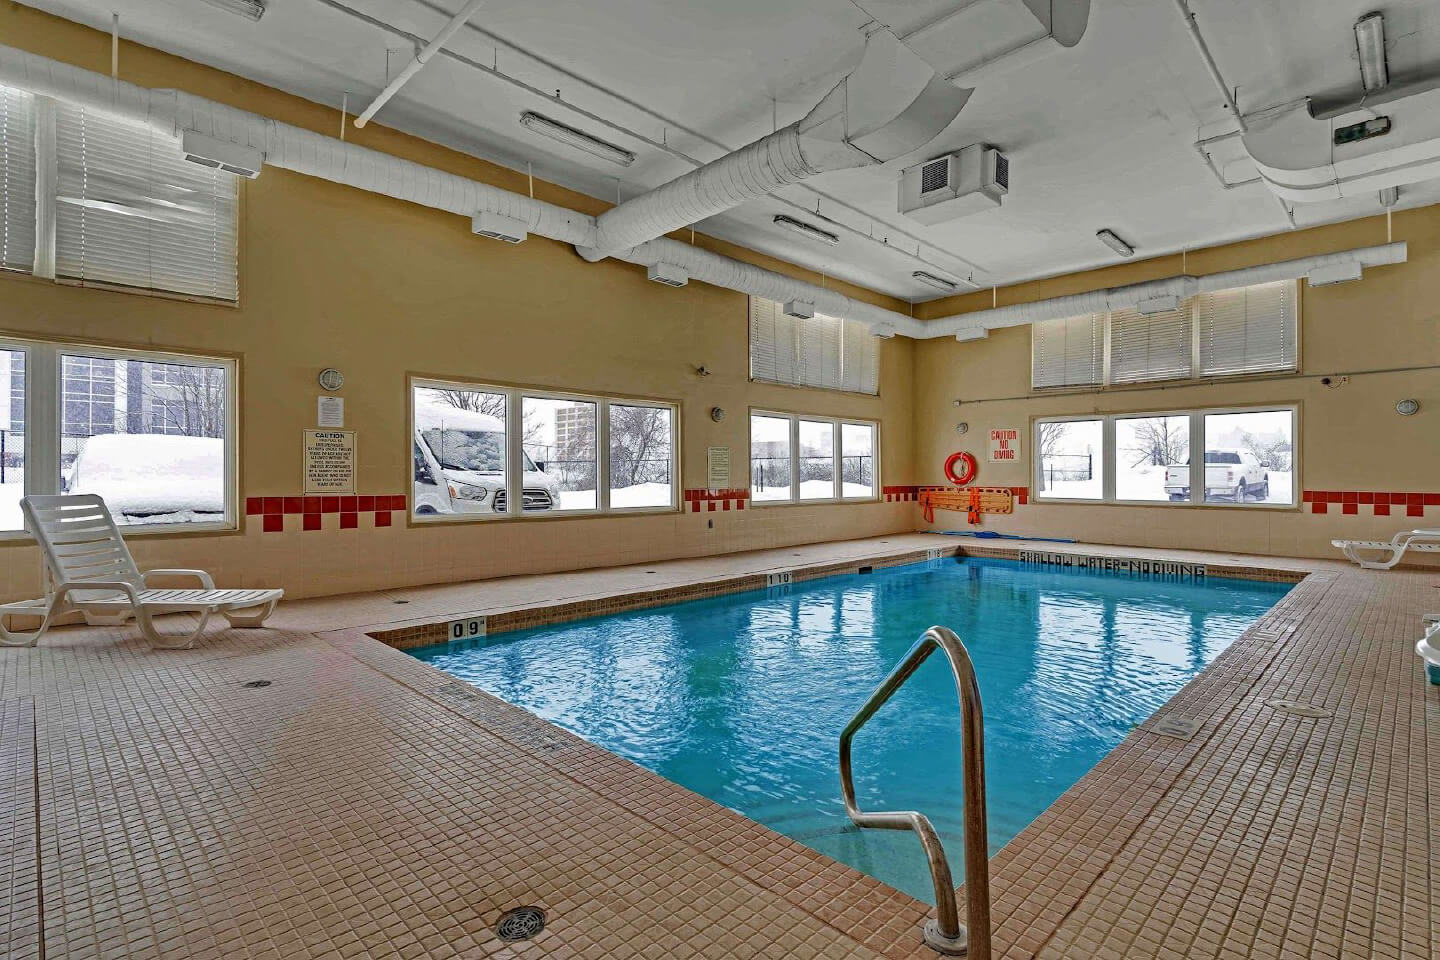 Indoor Pool at the Quality Inn and Choices Hotels - Grimsby, Ontario Location